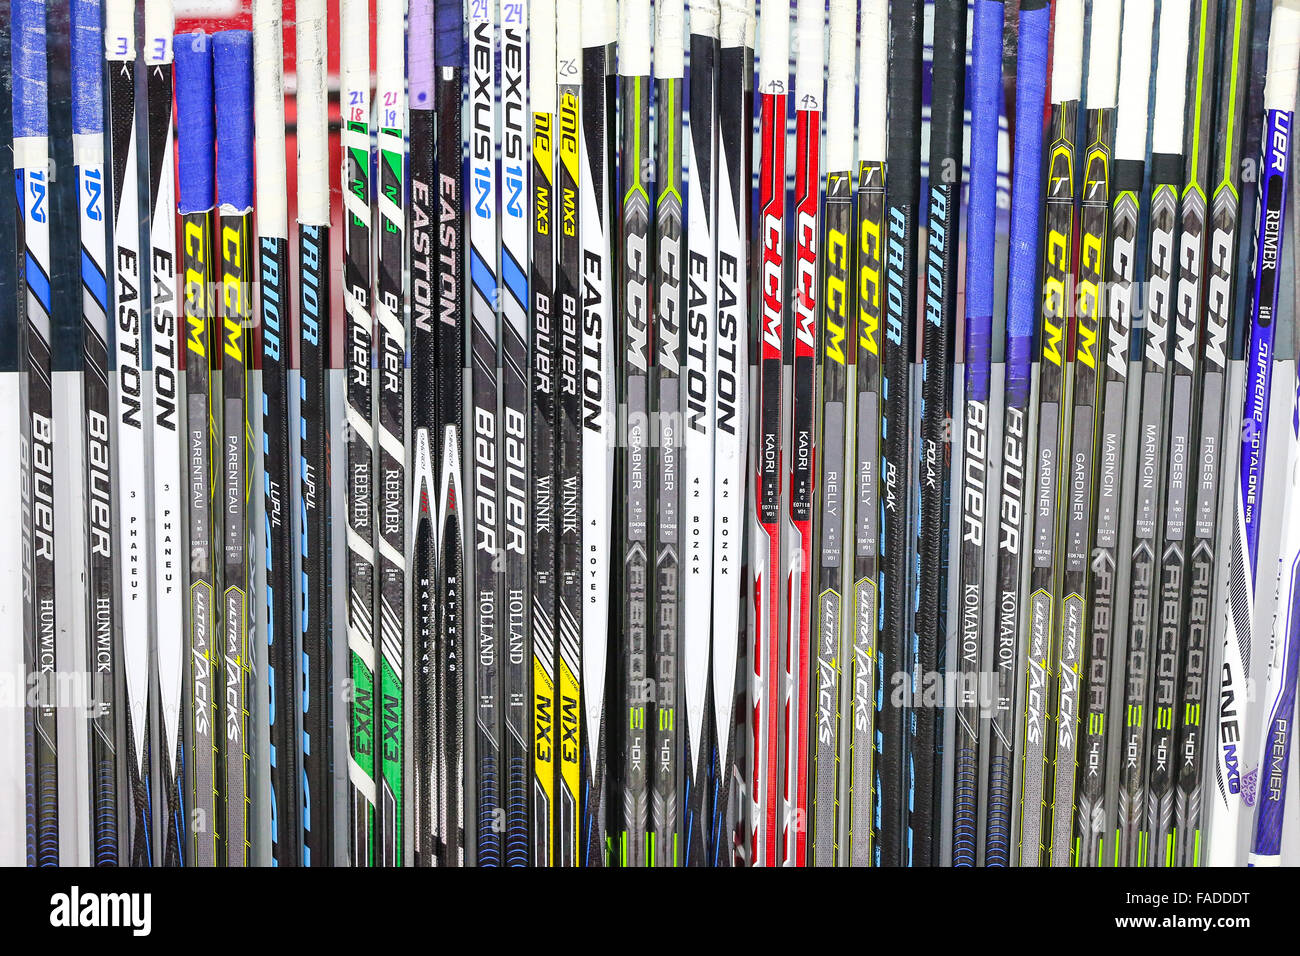 Toronto Maple Leafs hockey sticks during the NHL game between the Toronto Maple Leafs and the Carolina Hurricanes at the PNC Arena. Stock Photo